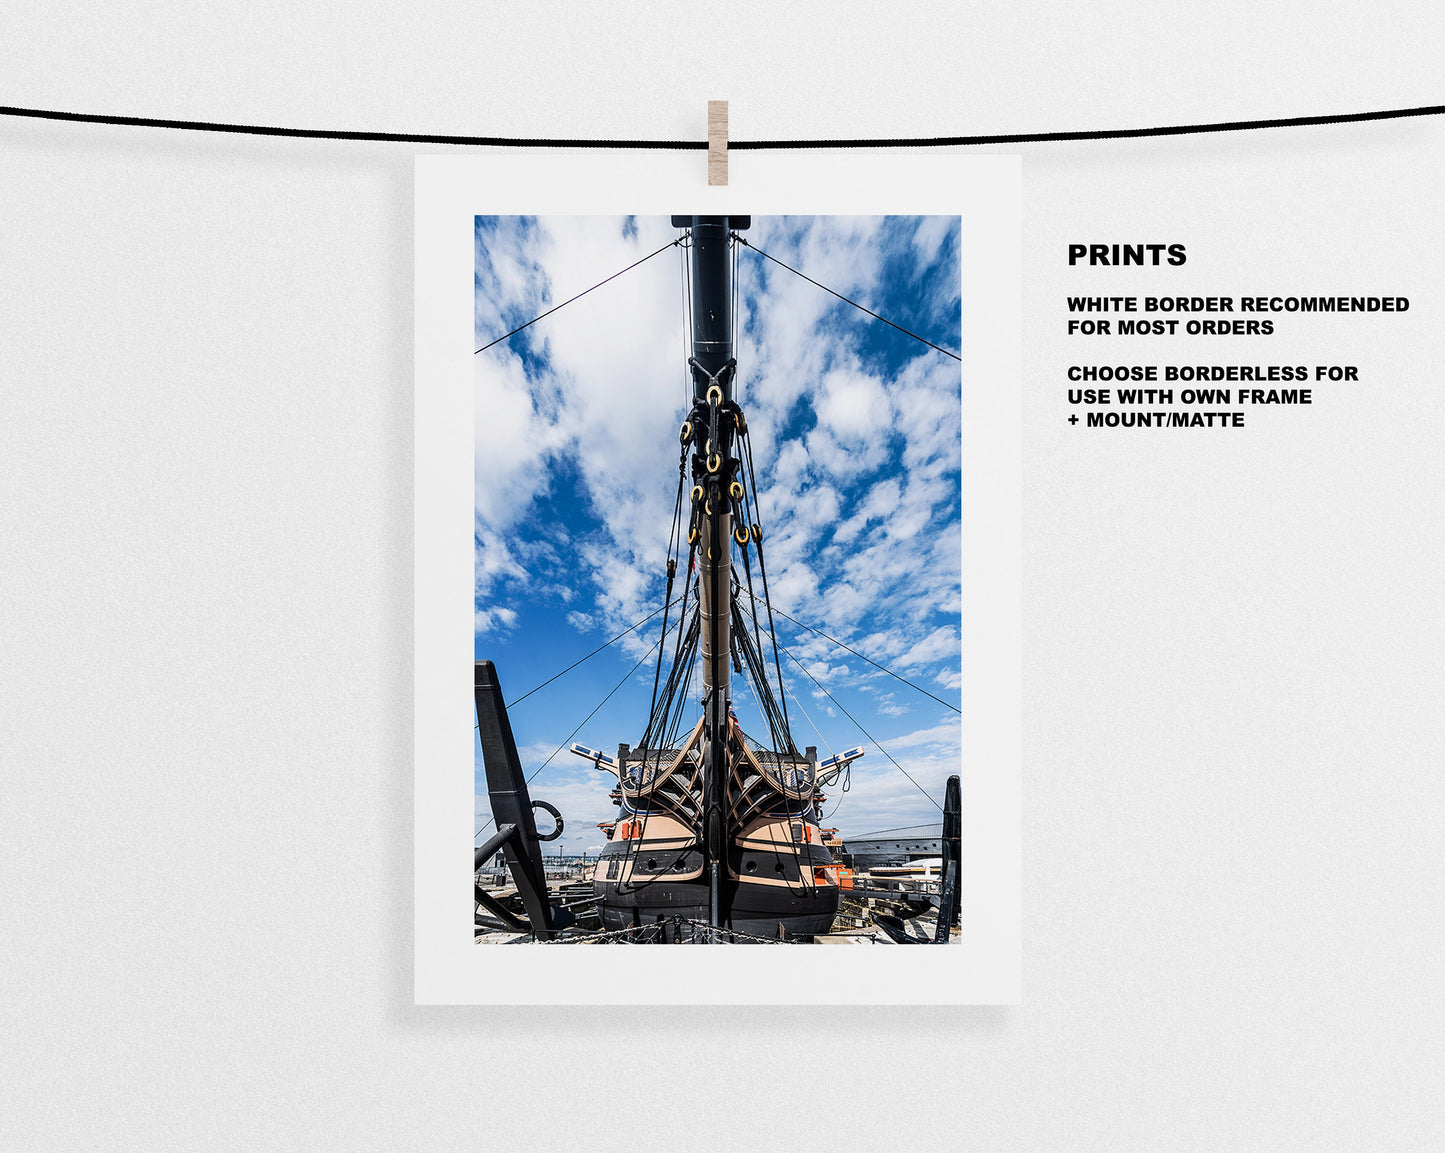 Victory - Photography Print - Portsmouth and Southsea Prints - Wall Art -  Frame and Canvas Options - Portrait